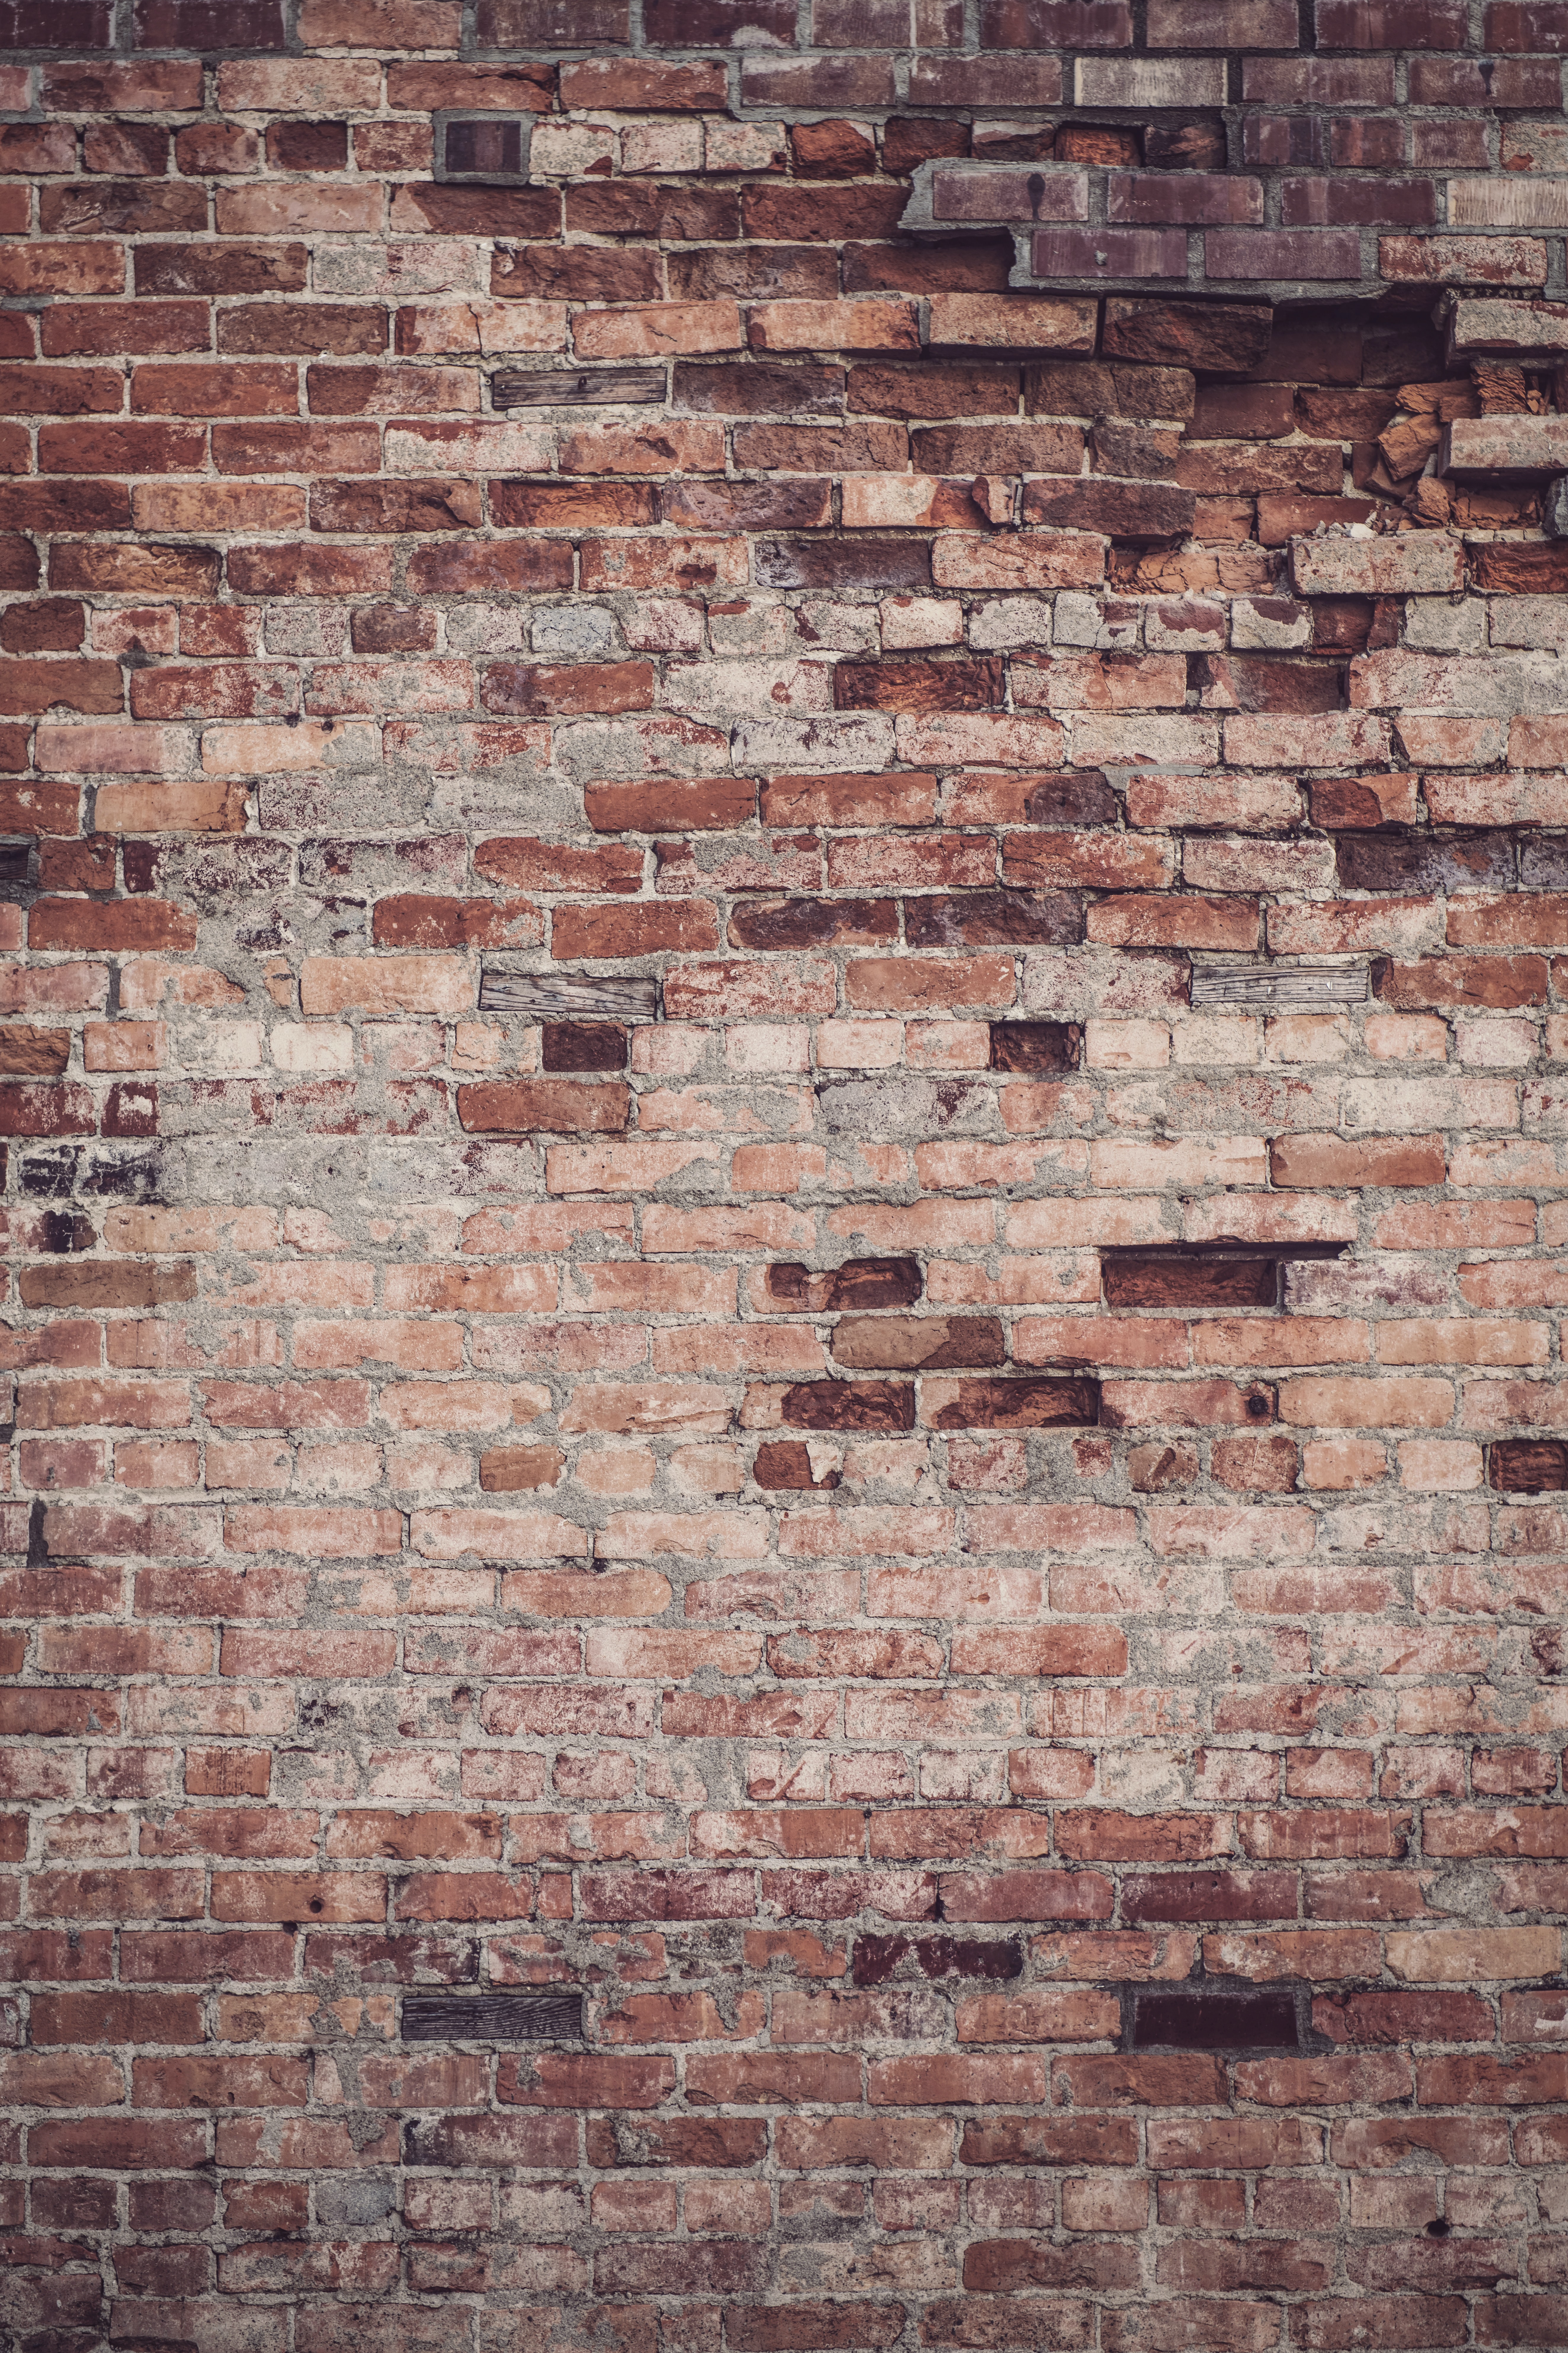 bricks, textures, wall, texture home screen for smartphone